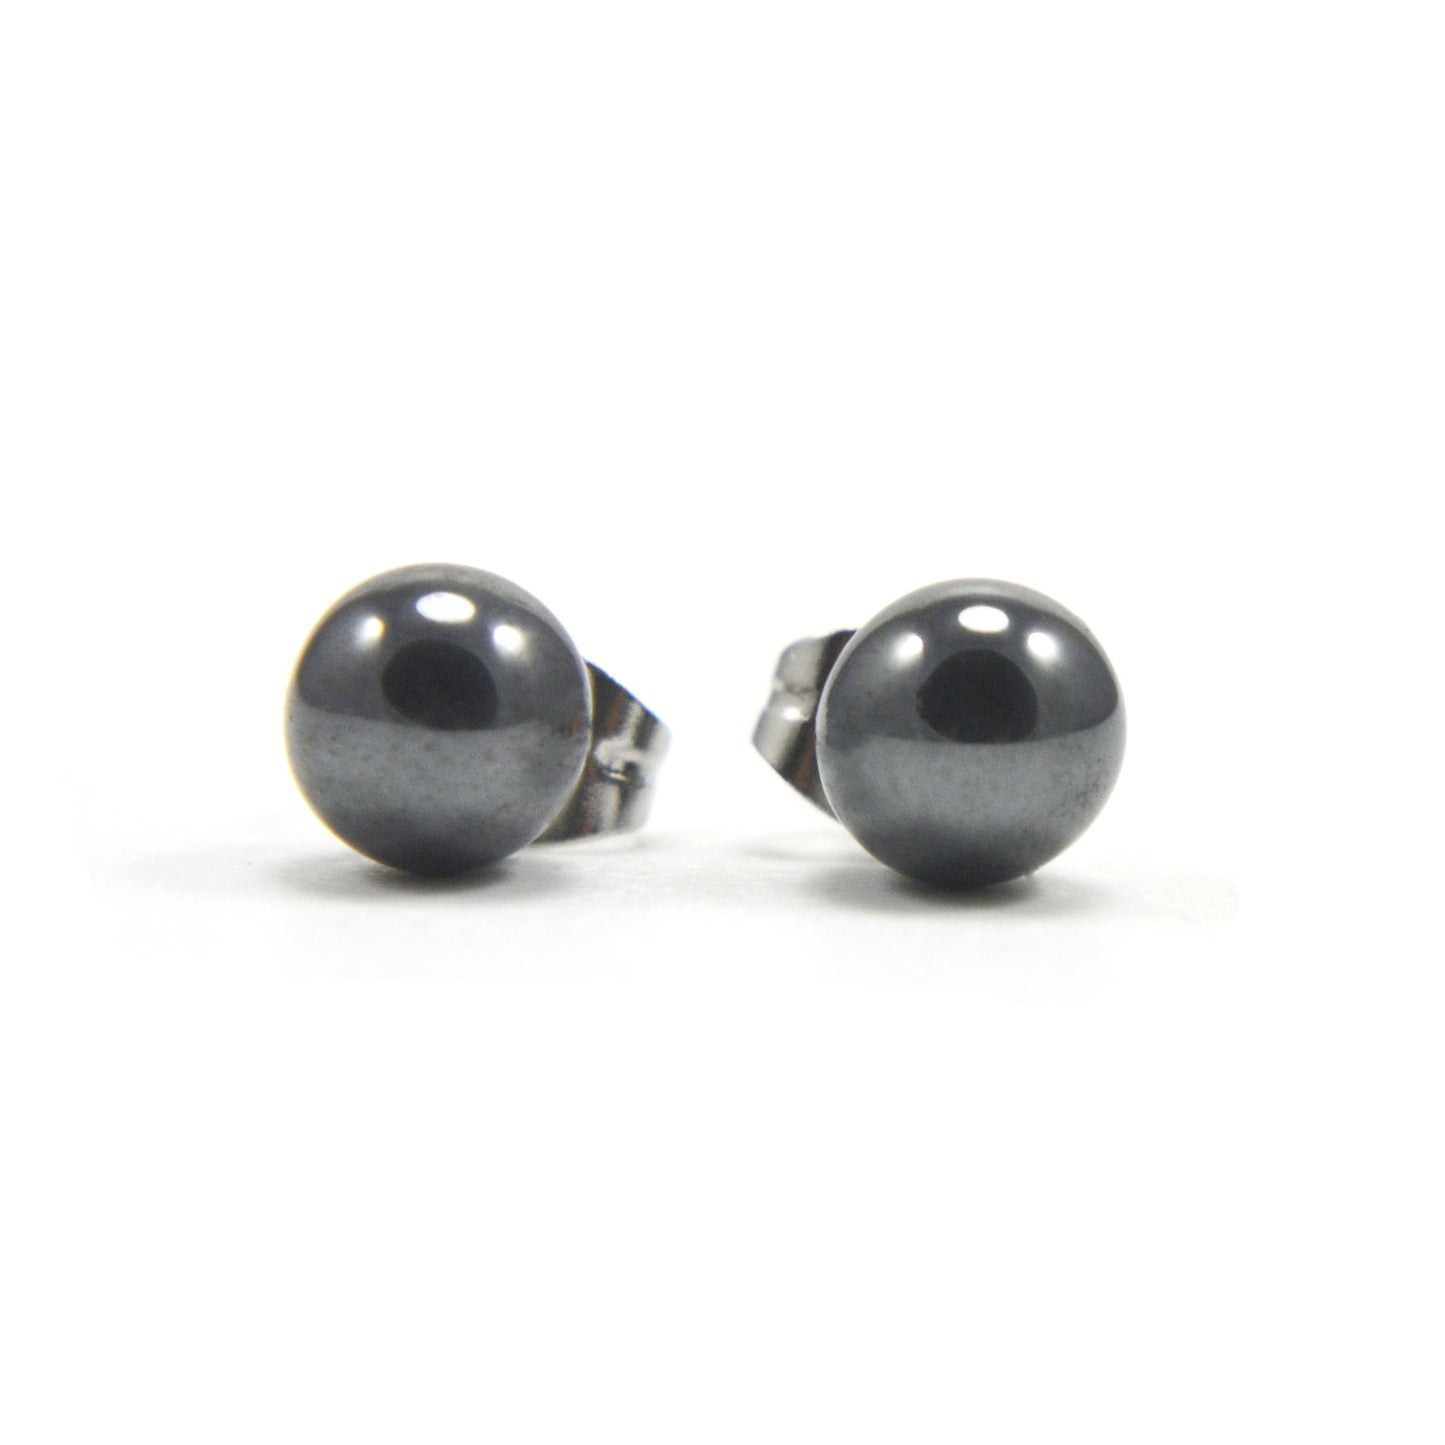 Front view of Hematite stud earrings on white background